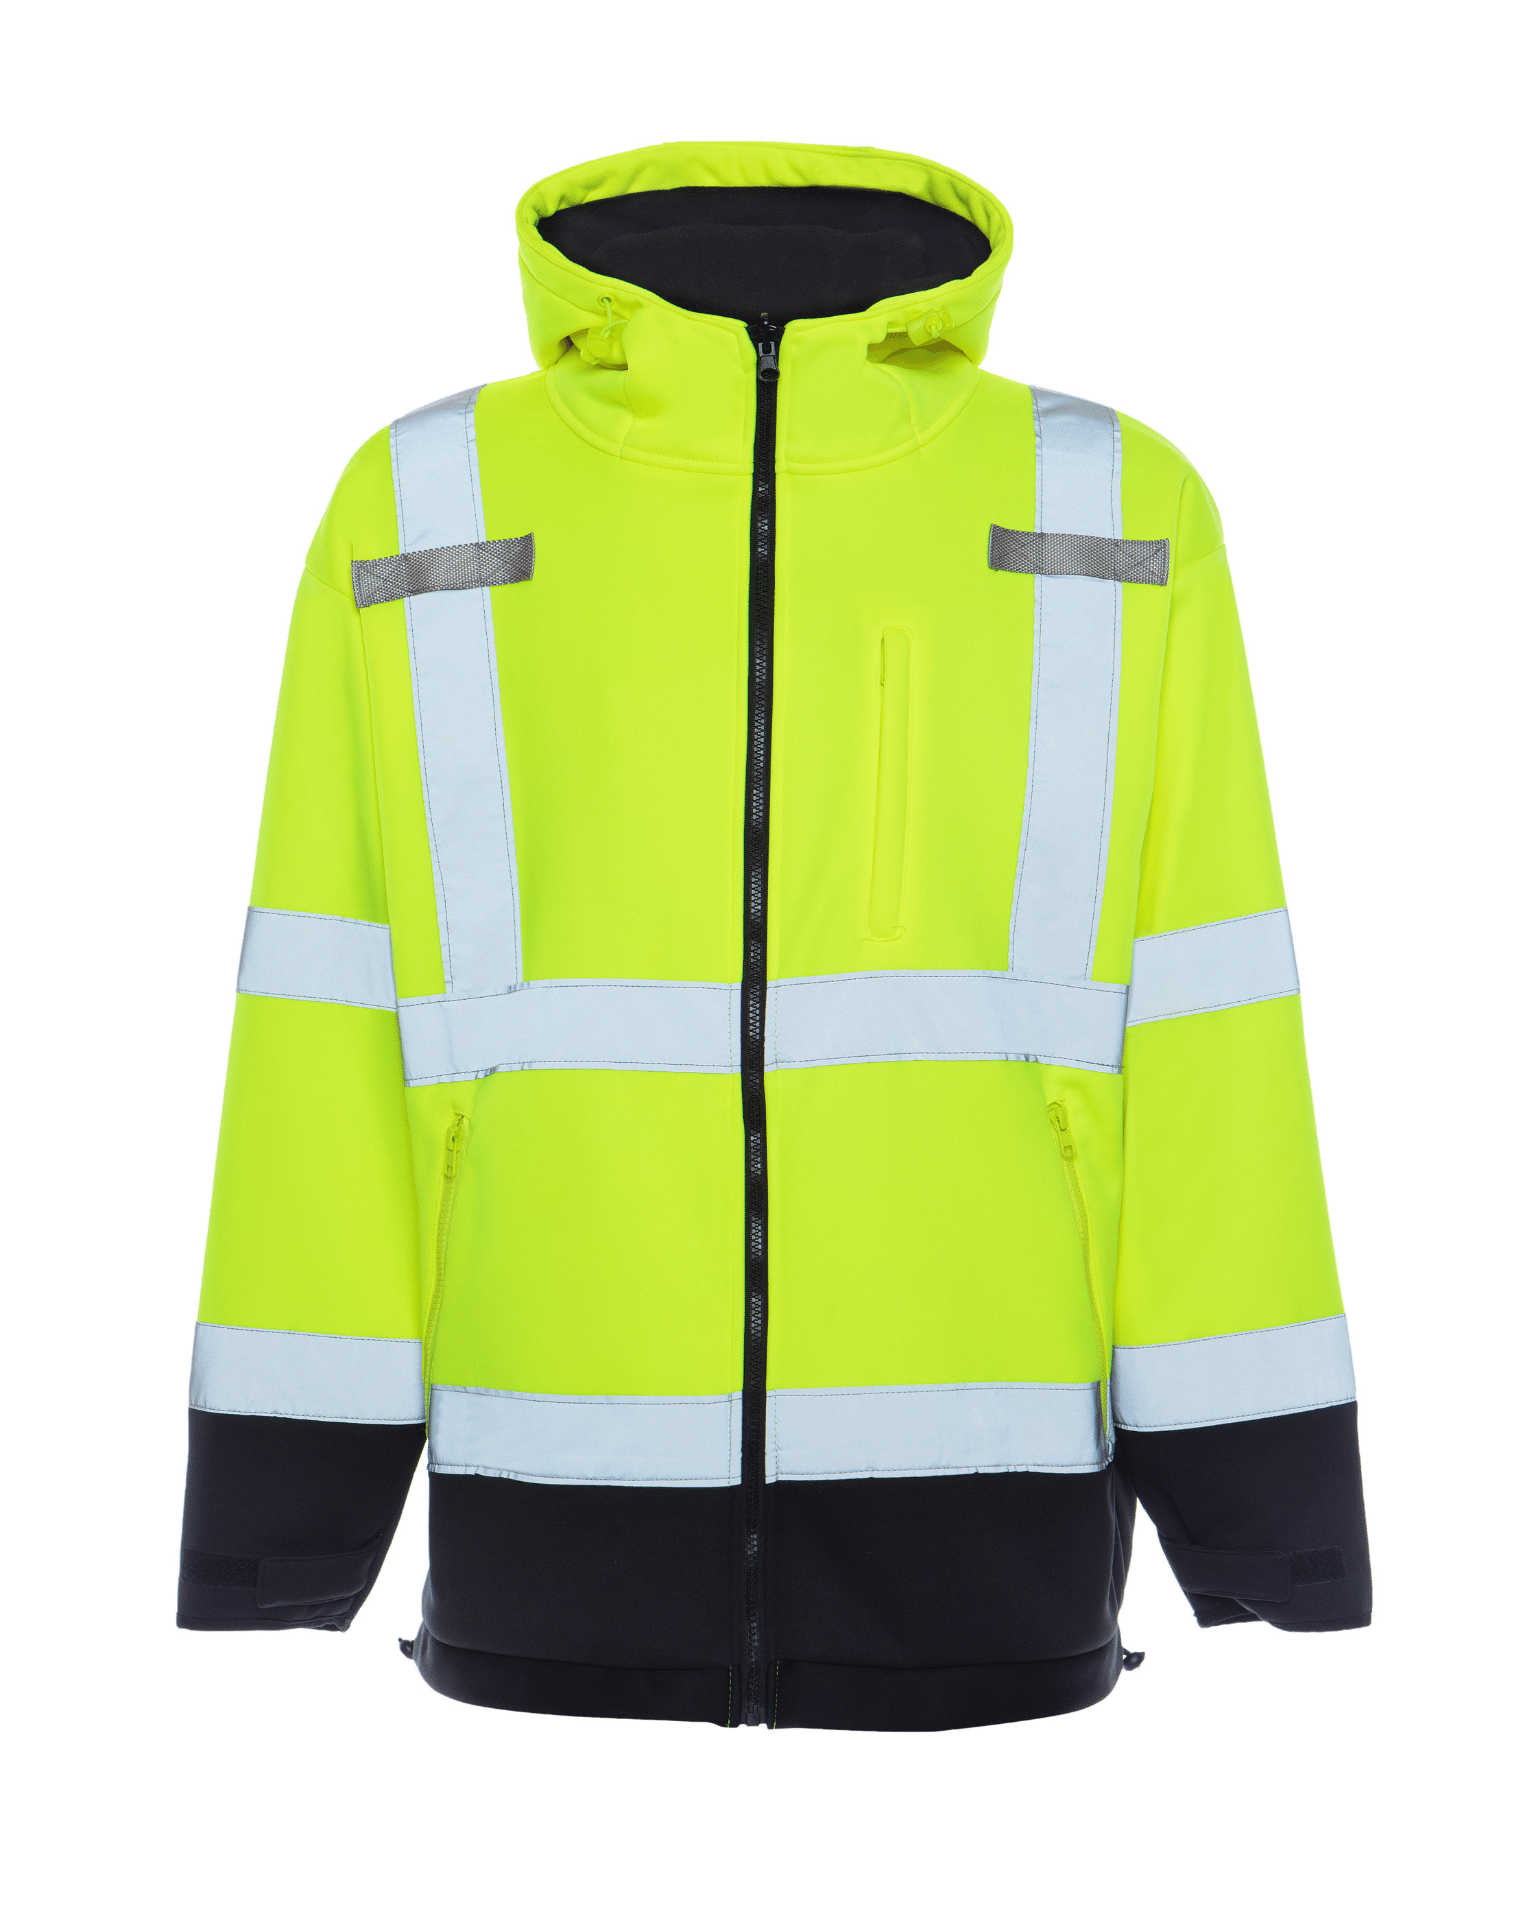 ASNI Class 3 High Visibility fleece lined polyamide fabric with teflon protection soft shell jacket by Utility Pro